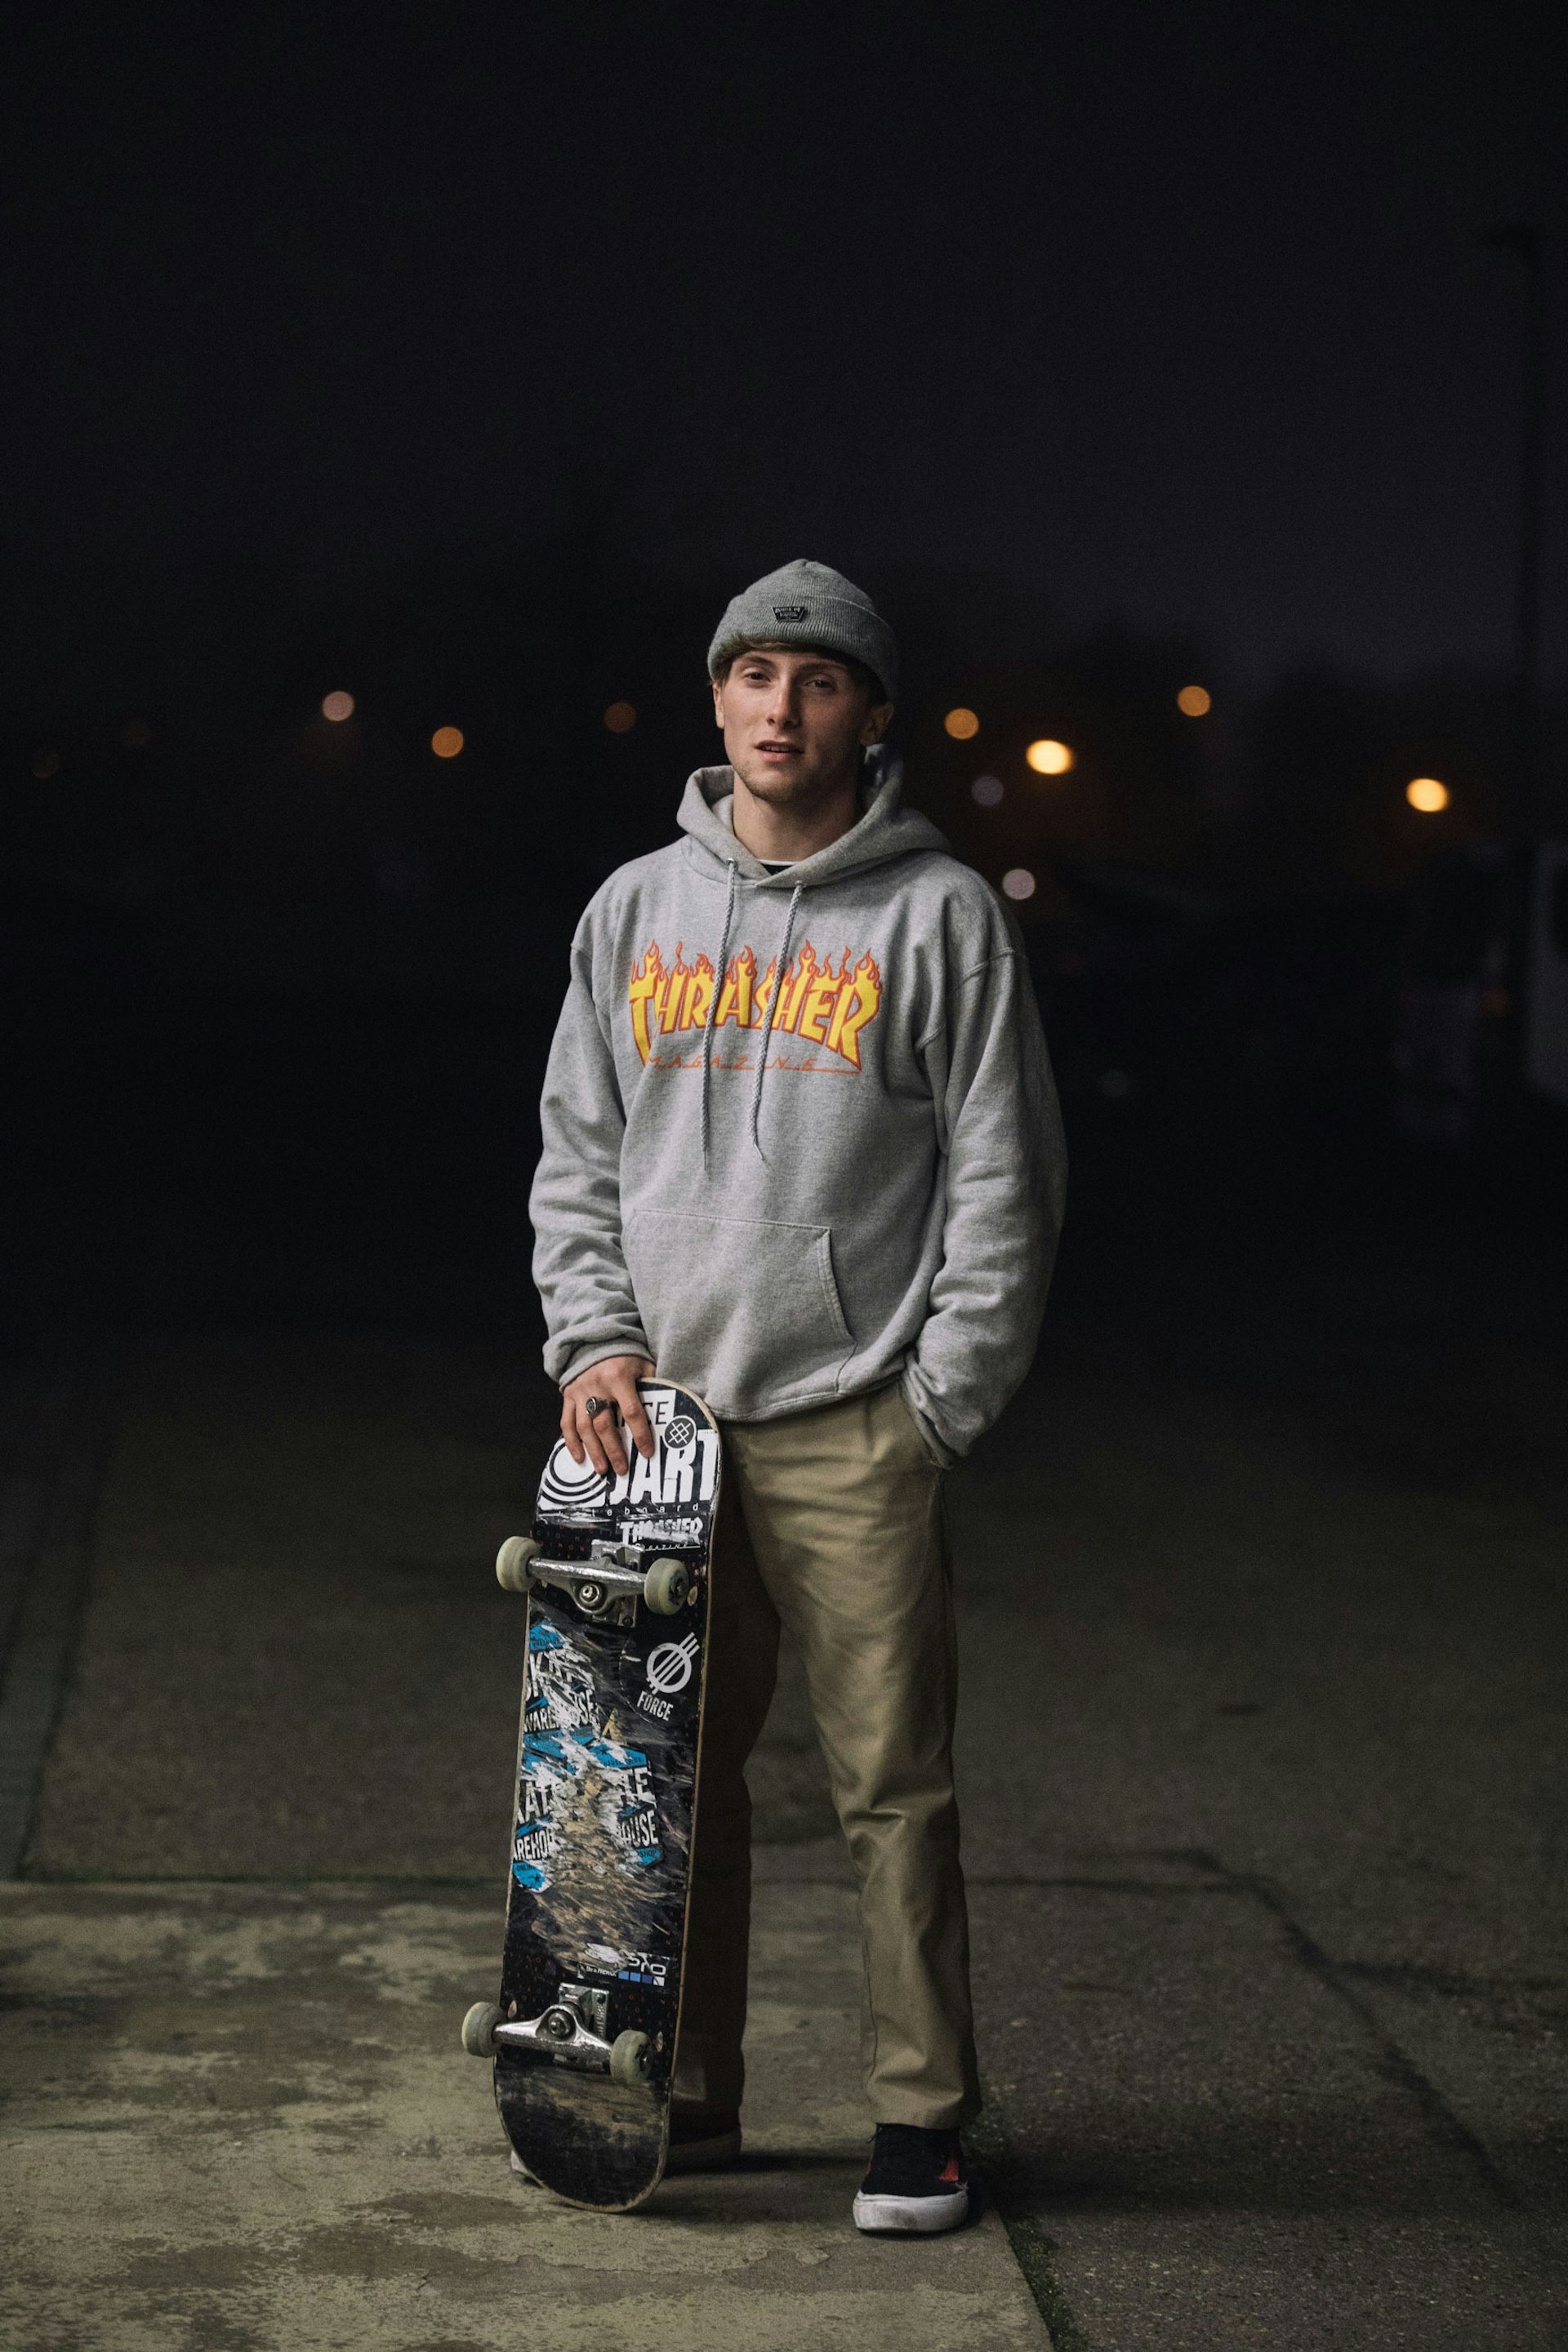 Alex DeCunha, 20, Skate Warehouse (UK). "I think the importance of skate shops is guidance, without them people would just buy random things that might not be best for them. Plus, learning to skate in front of huge groups of people really helps with your confidence in day-to-day situations."